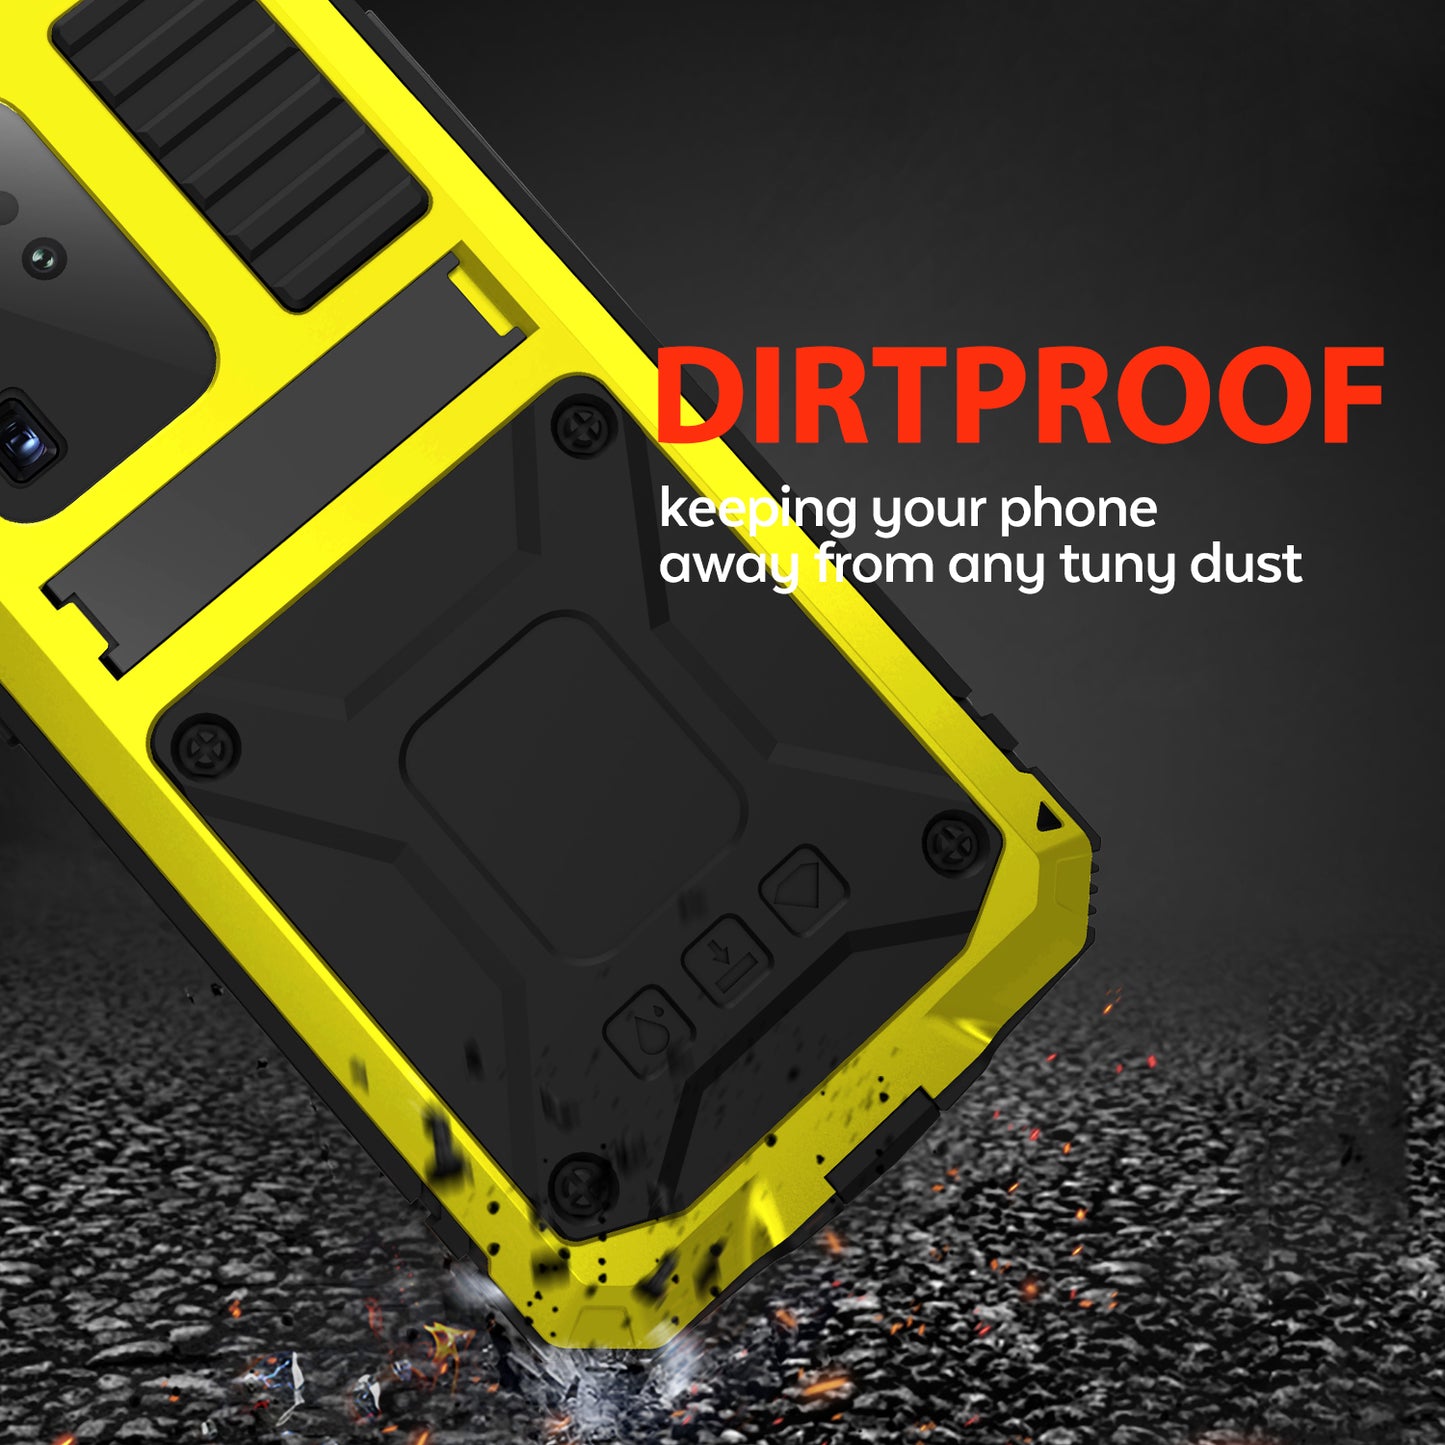 R-Just Kickstand Waterproof Aluminum Metal Outdoor Military Heavy Duty Case Cover